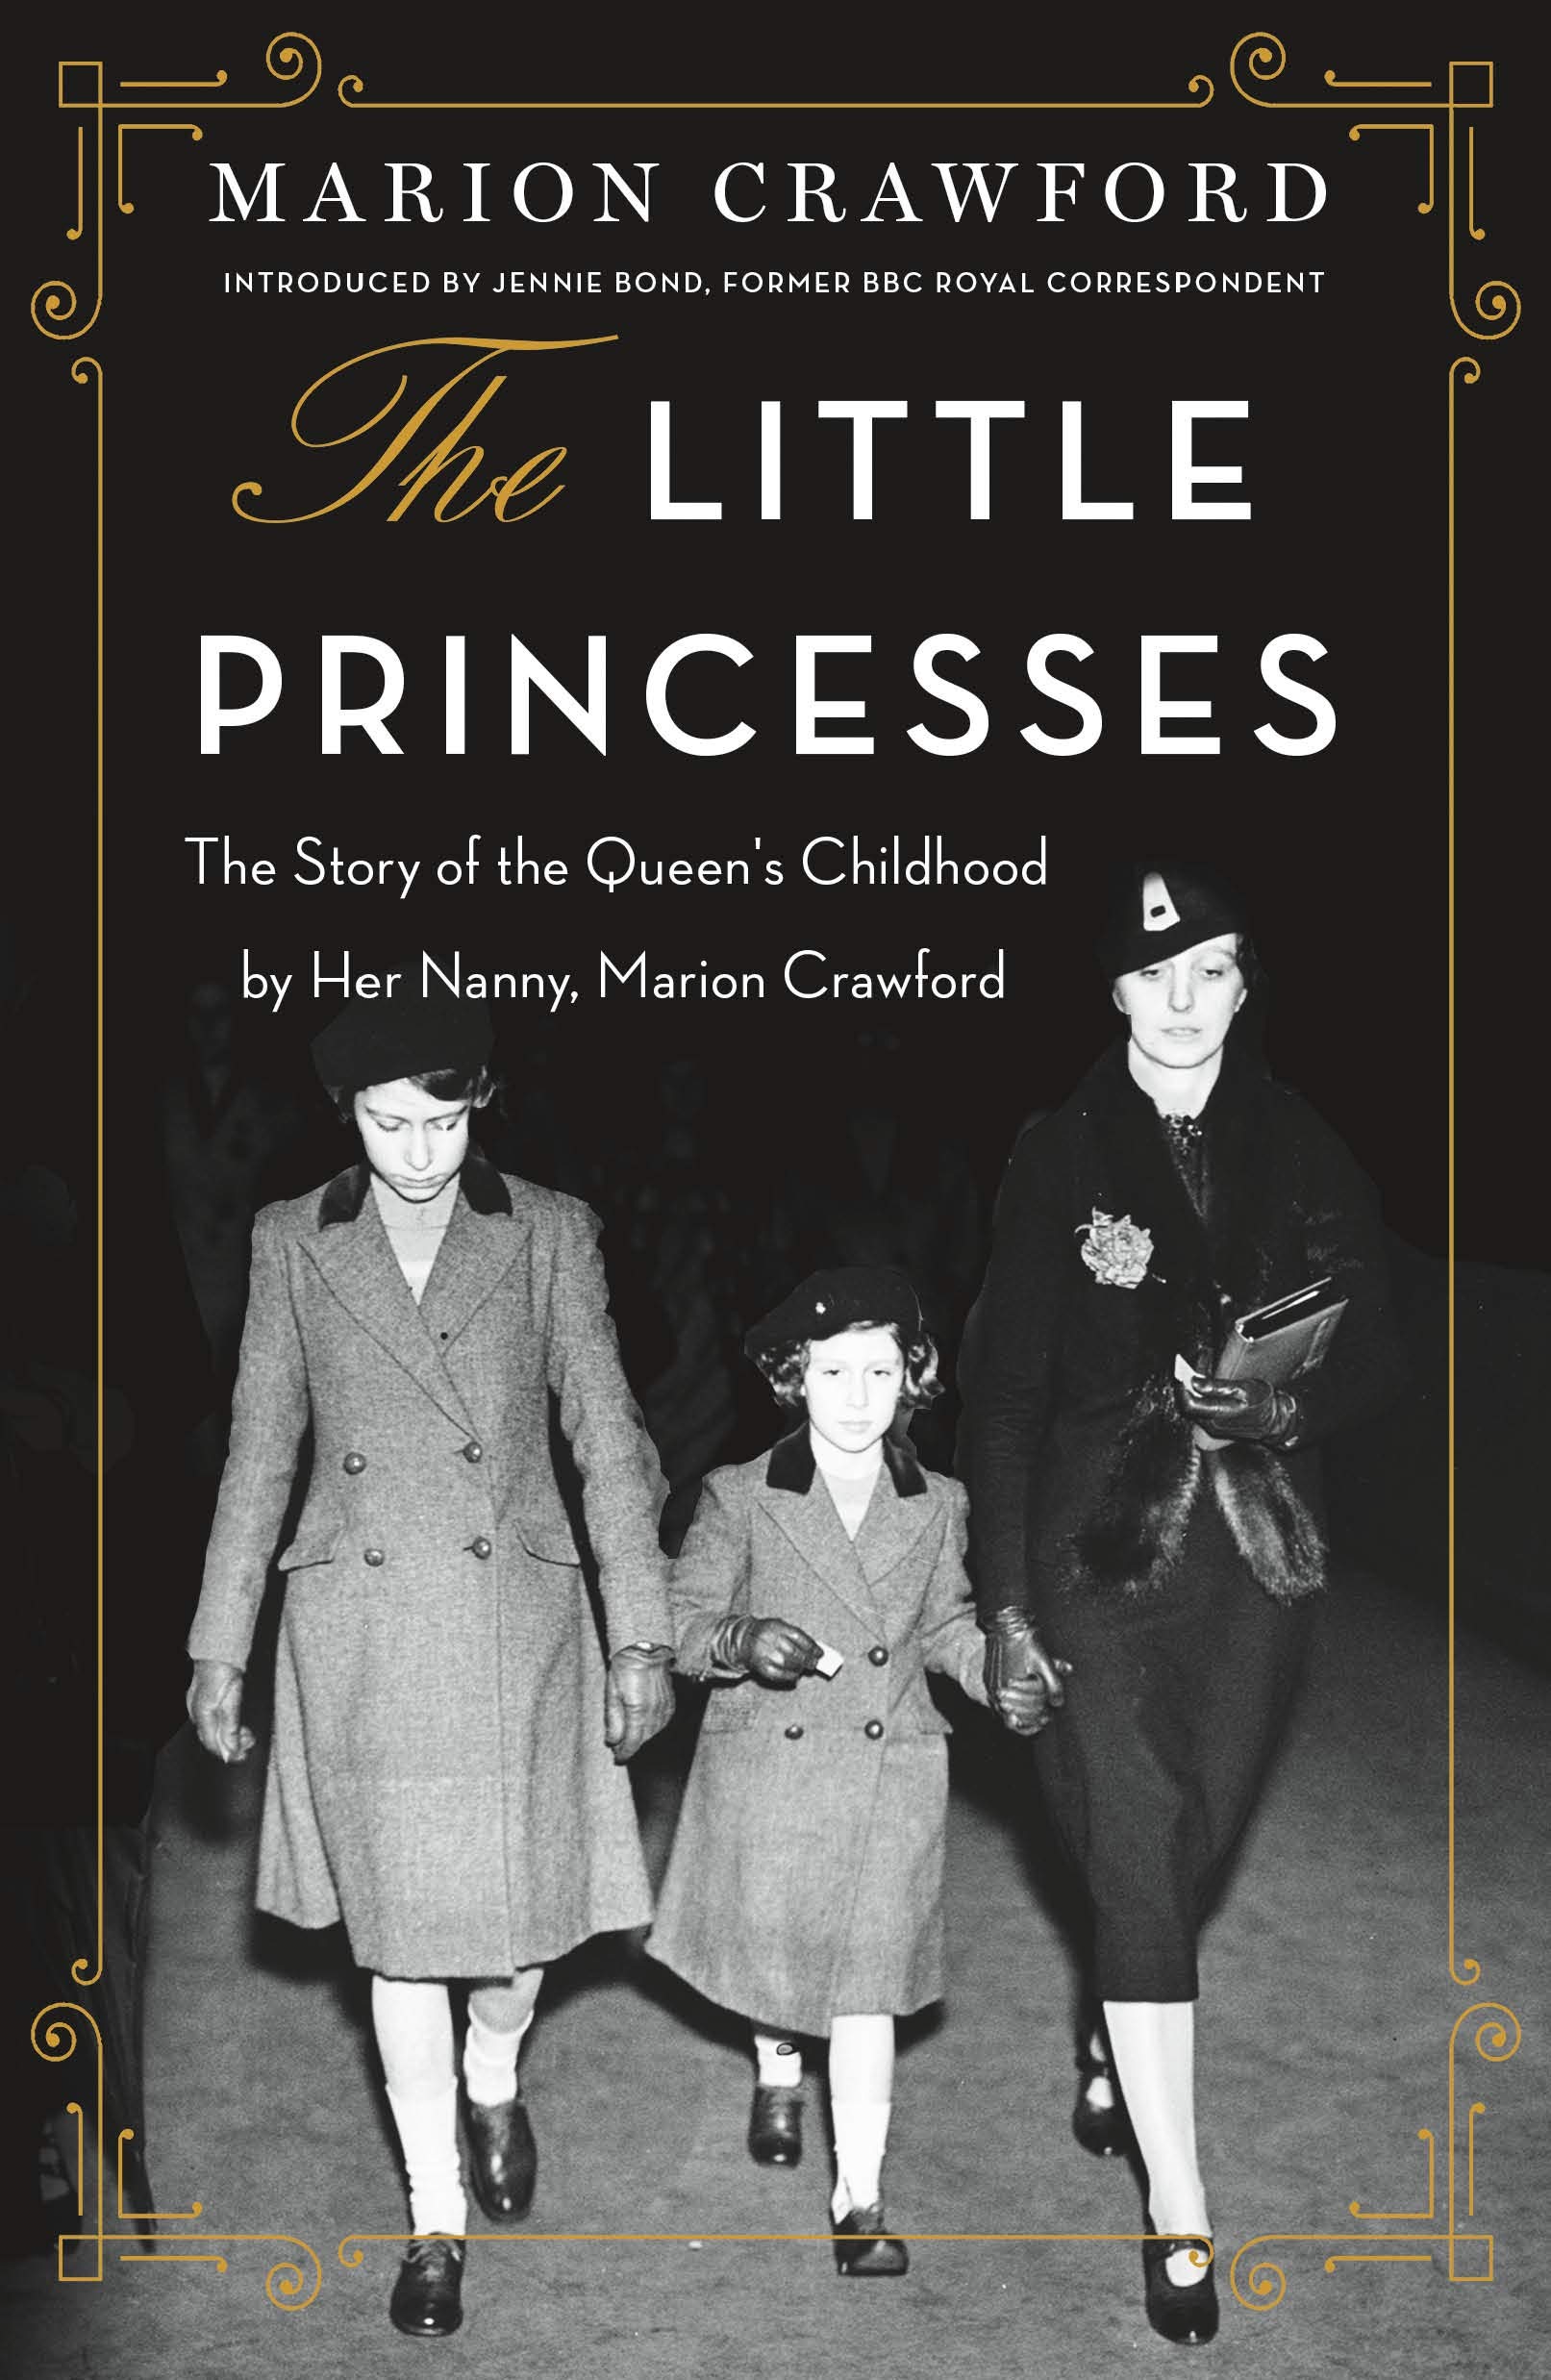 The Little Princesses: The Story of the Queen's Childhood by Her Nanny, Marion Crawford